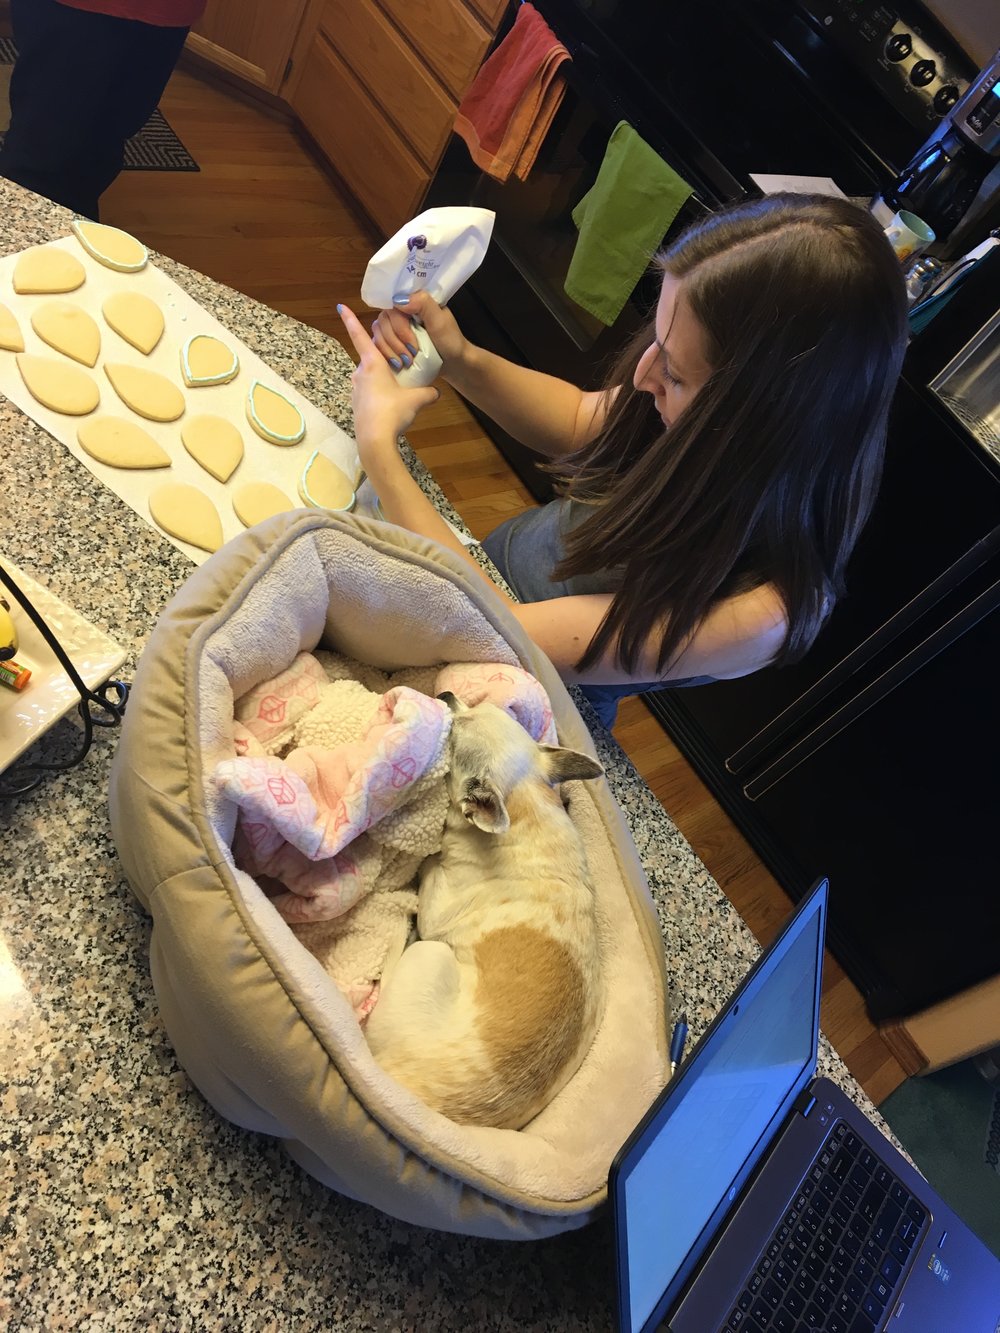  Decorating cookies with Frieda's supervision.&nbsp; 